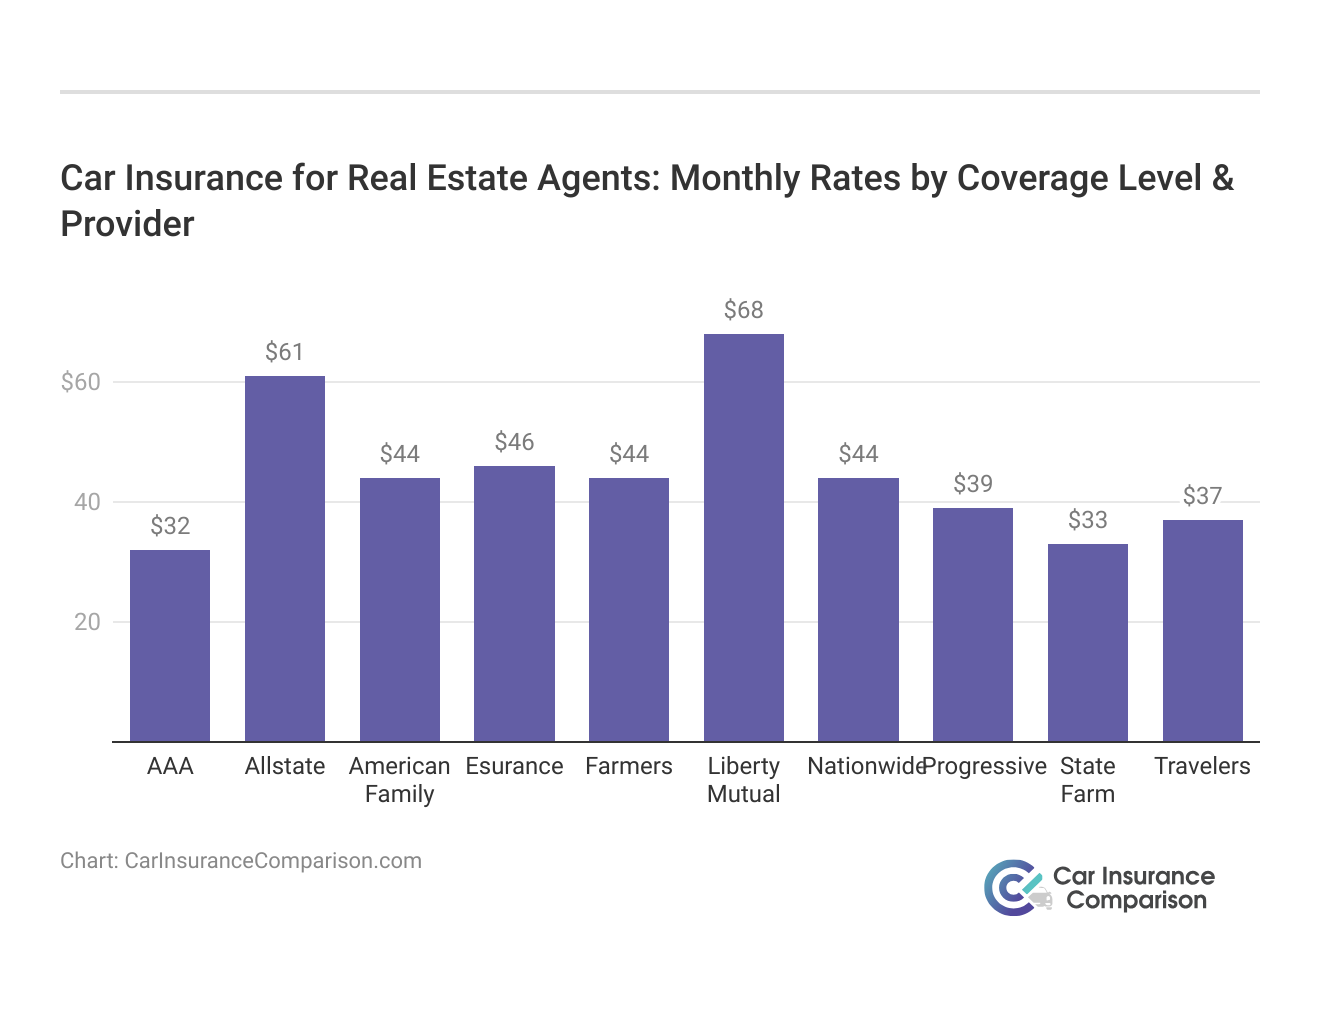 <h3>Car Insurance for Real Estate Agents: Monthly Rates by Coverage Level & Provider</h3>